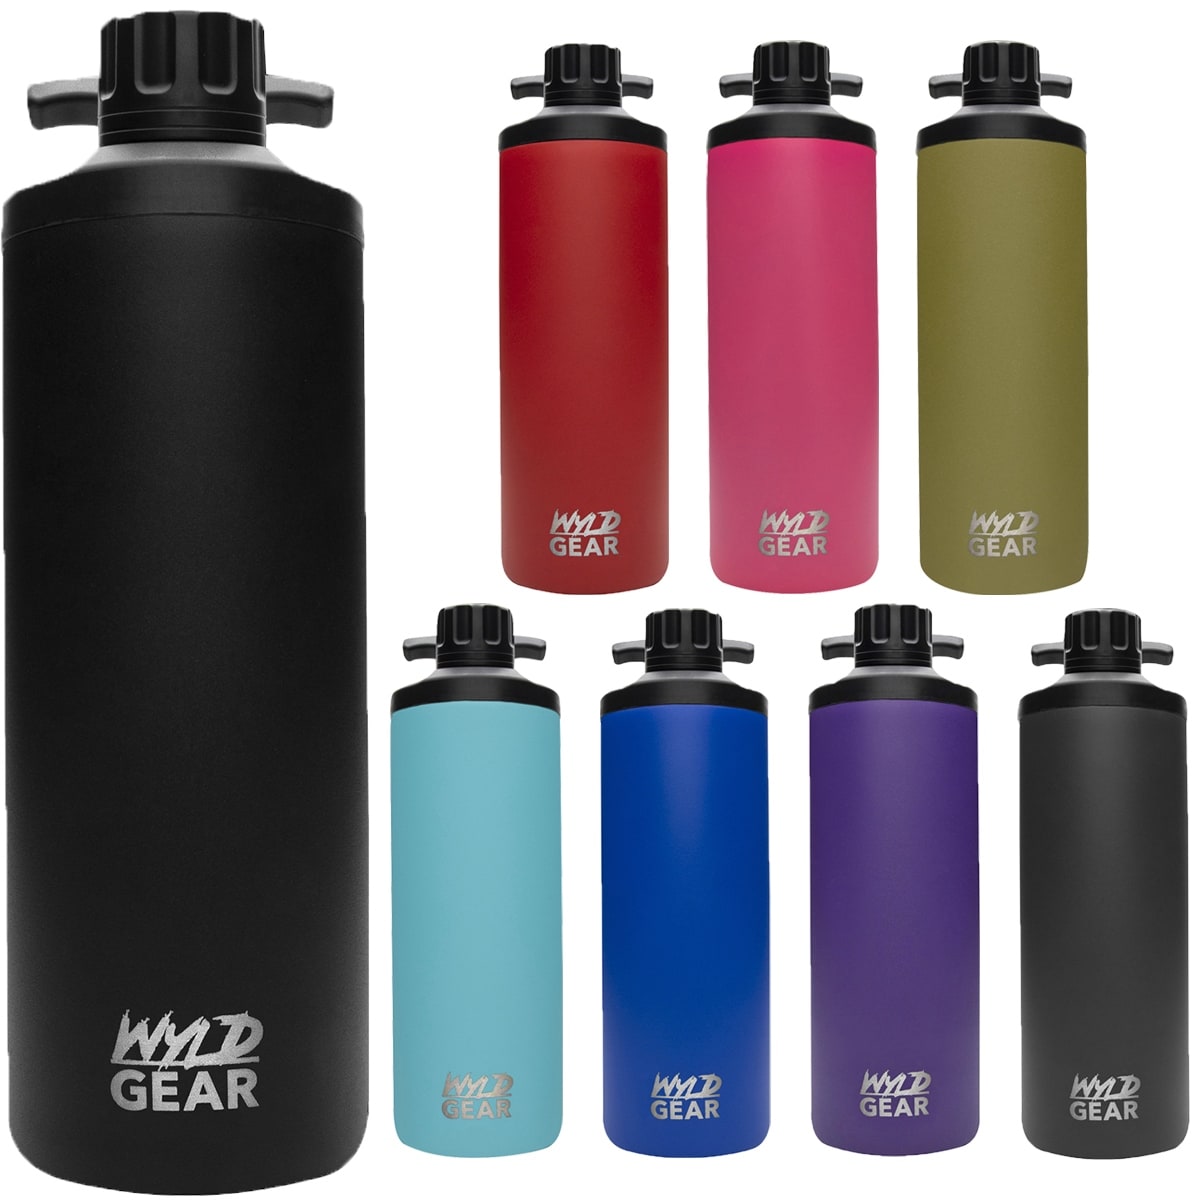 https://ak1.ostkcdn.com/images/products/is/images/direct/1a8ccb731733b389da25ba0be141083abd2ddfcd/Wyld-Gear-Mag-Series-18-oz.-Insulated-Stainless-Steel-Water-Bottle.jpg